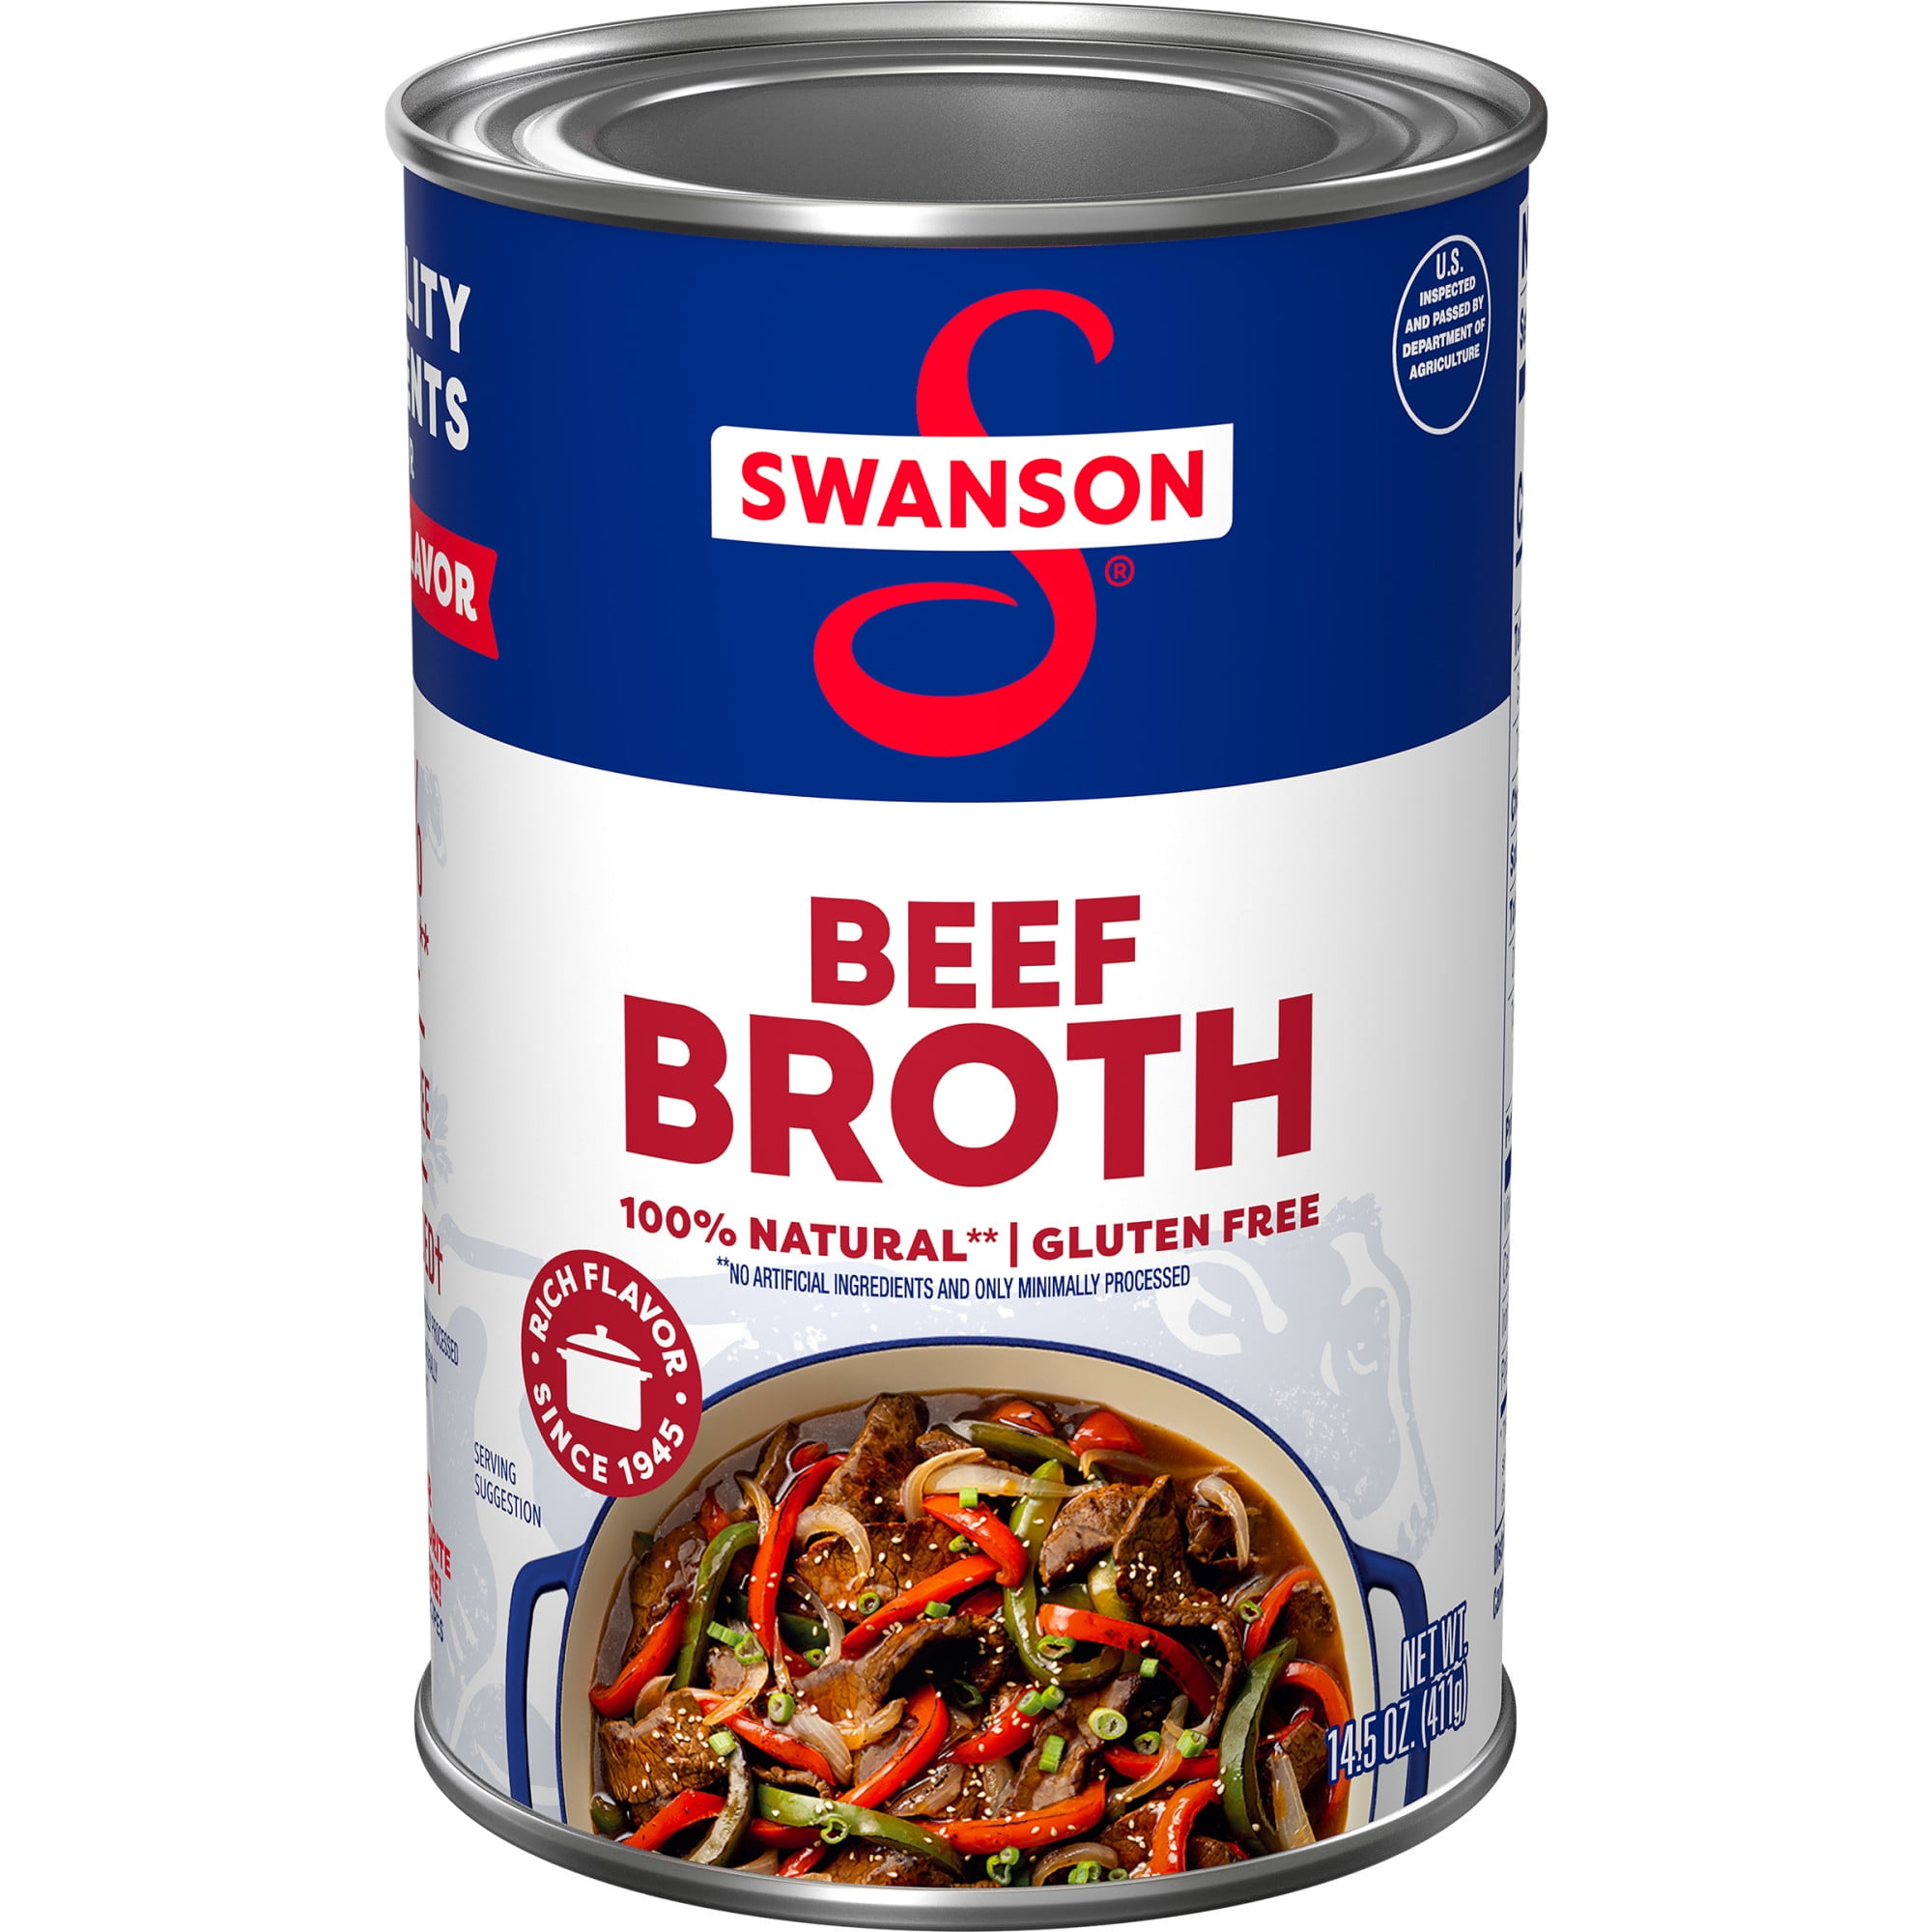 Swanson 100% Natural, Gluten-Free Beef Broth, 14.5 Oz Can